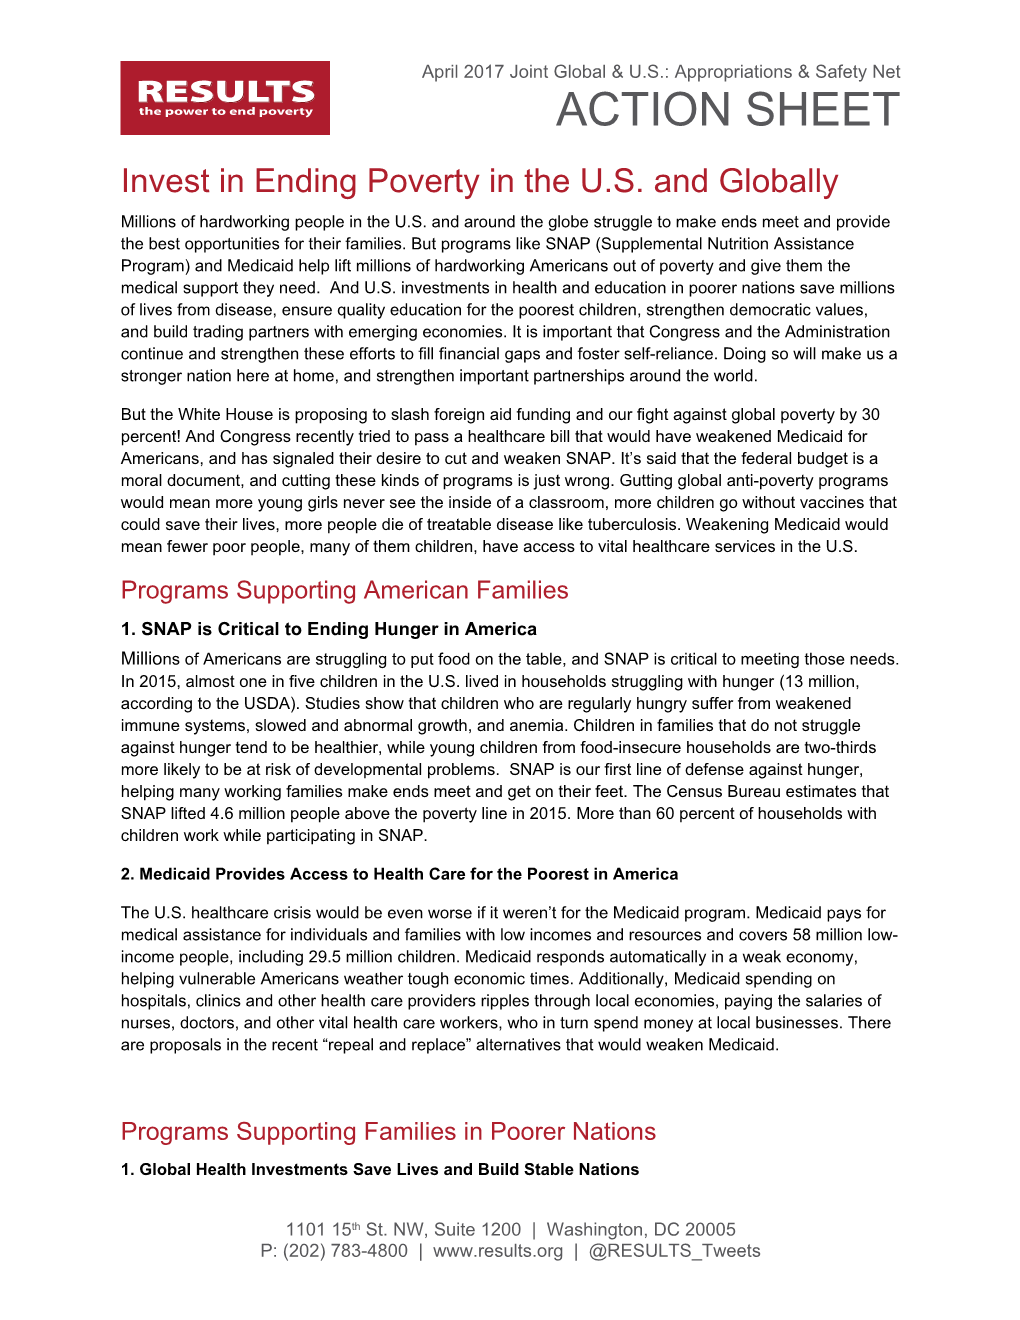 Invest in Ending Poverty in the U.S. and Globally